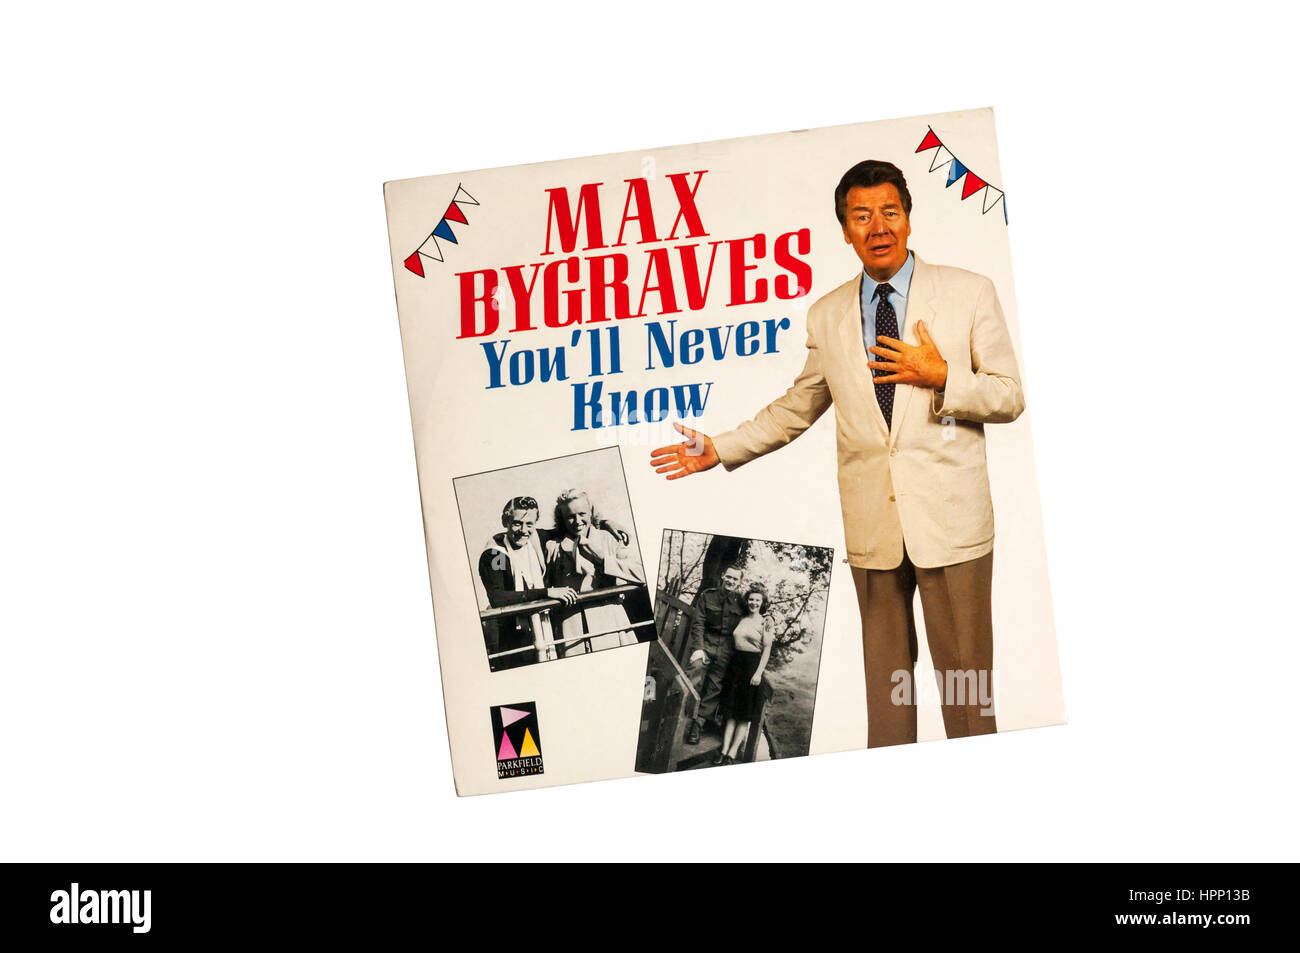 1989 EP You'll Never Know by Max Bygraves from his LP SingaLongaWarYears. Stock Photo